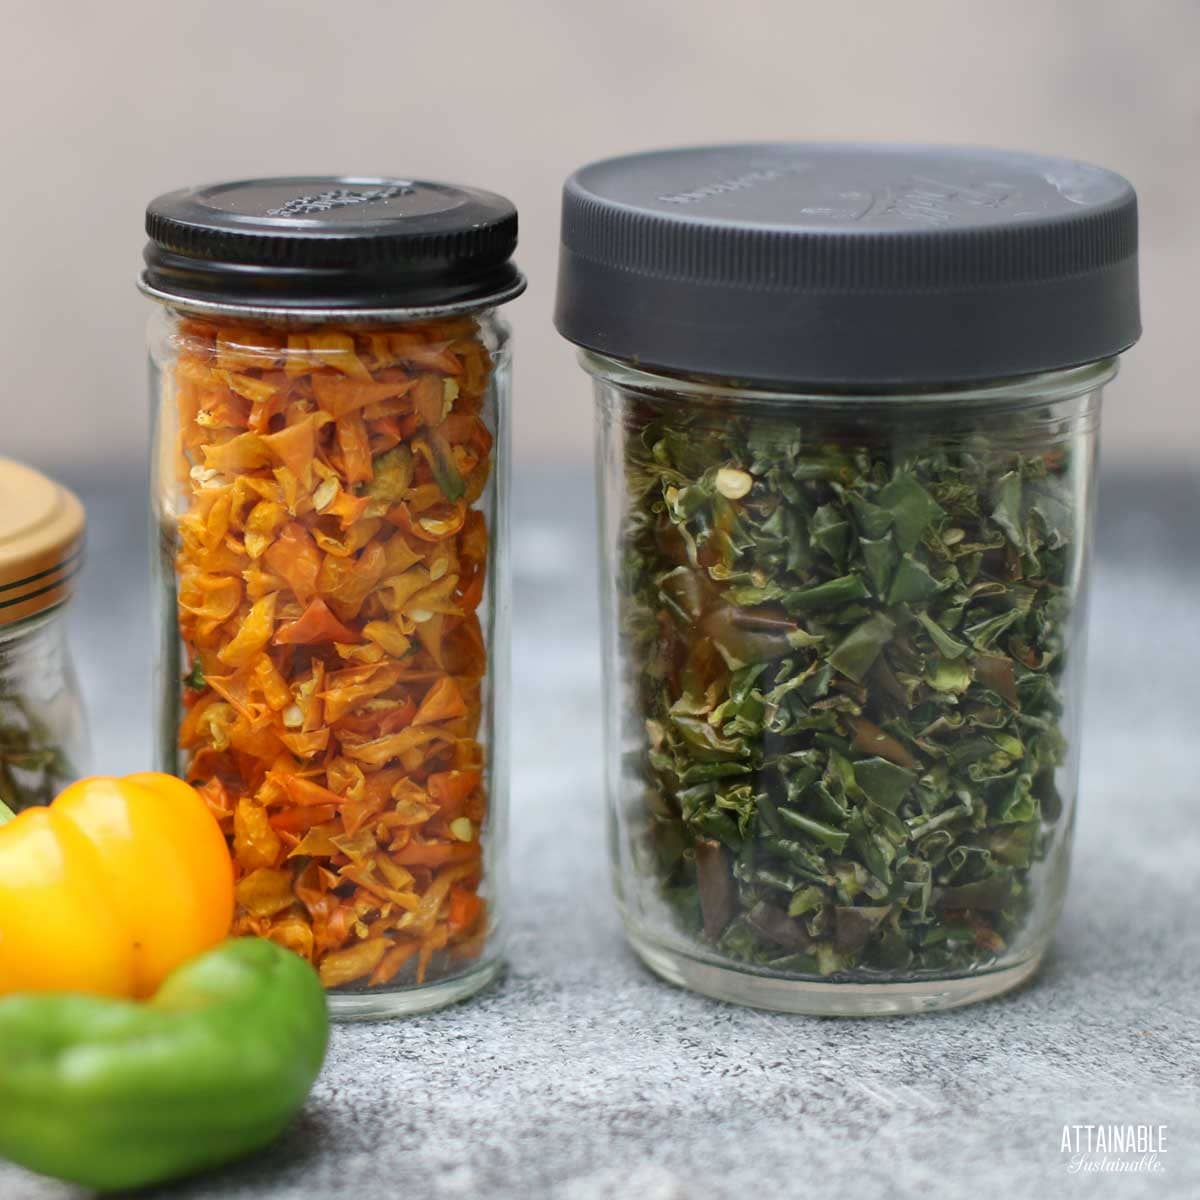 3 jars of dried peppers, yellow and green.